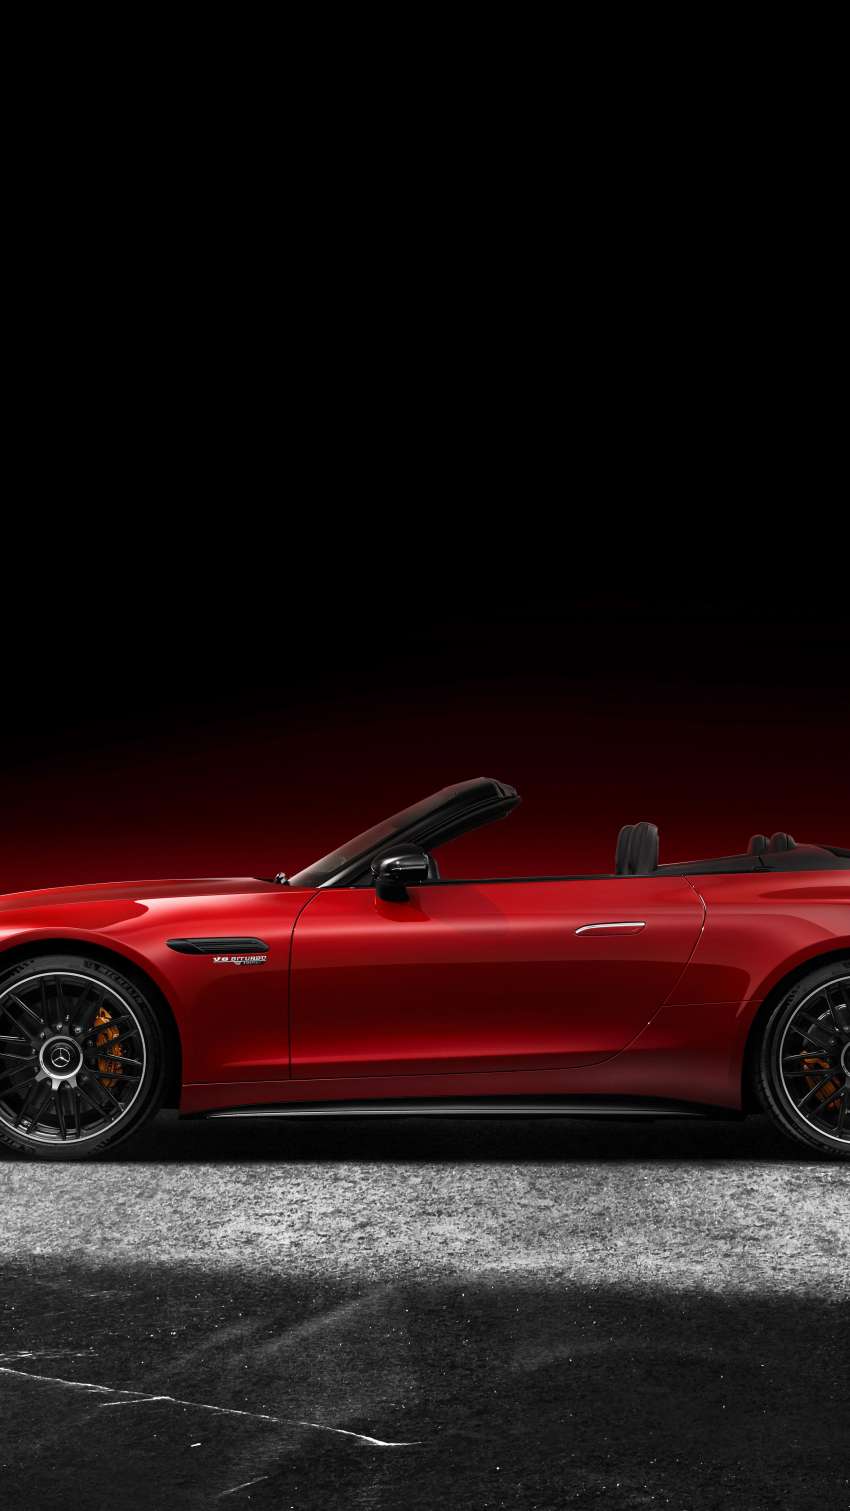 2022 Mercedes-AMG SL revealed – R232 developed by Affalterbach, 476 PS SL55, 585 PS SL63, PHEV later Image #1369270